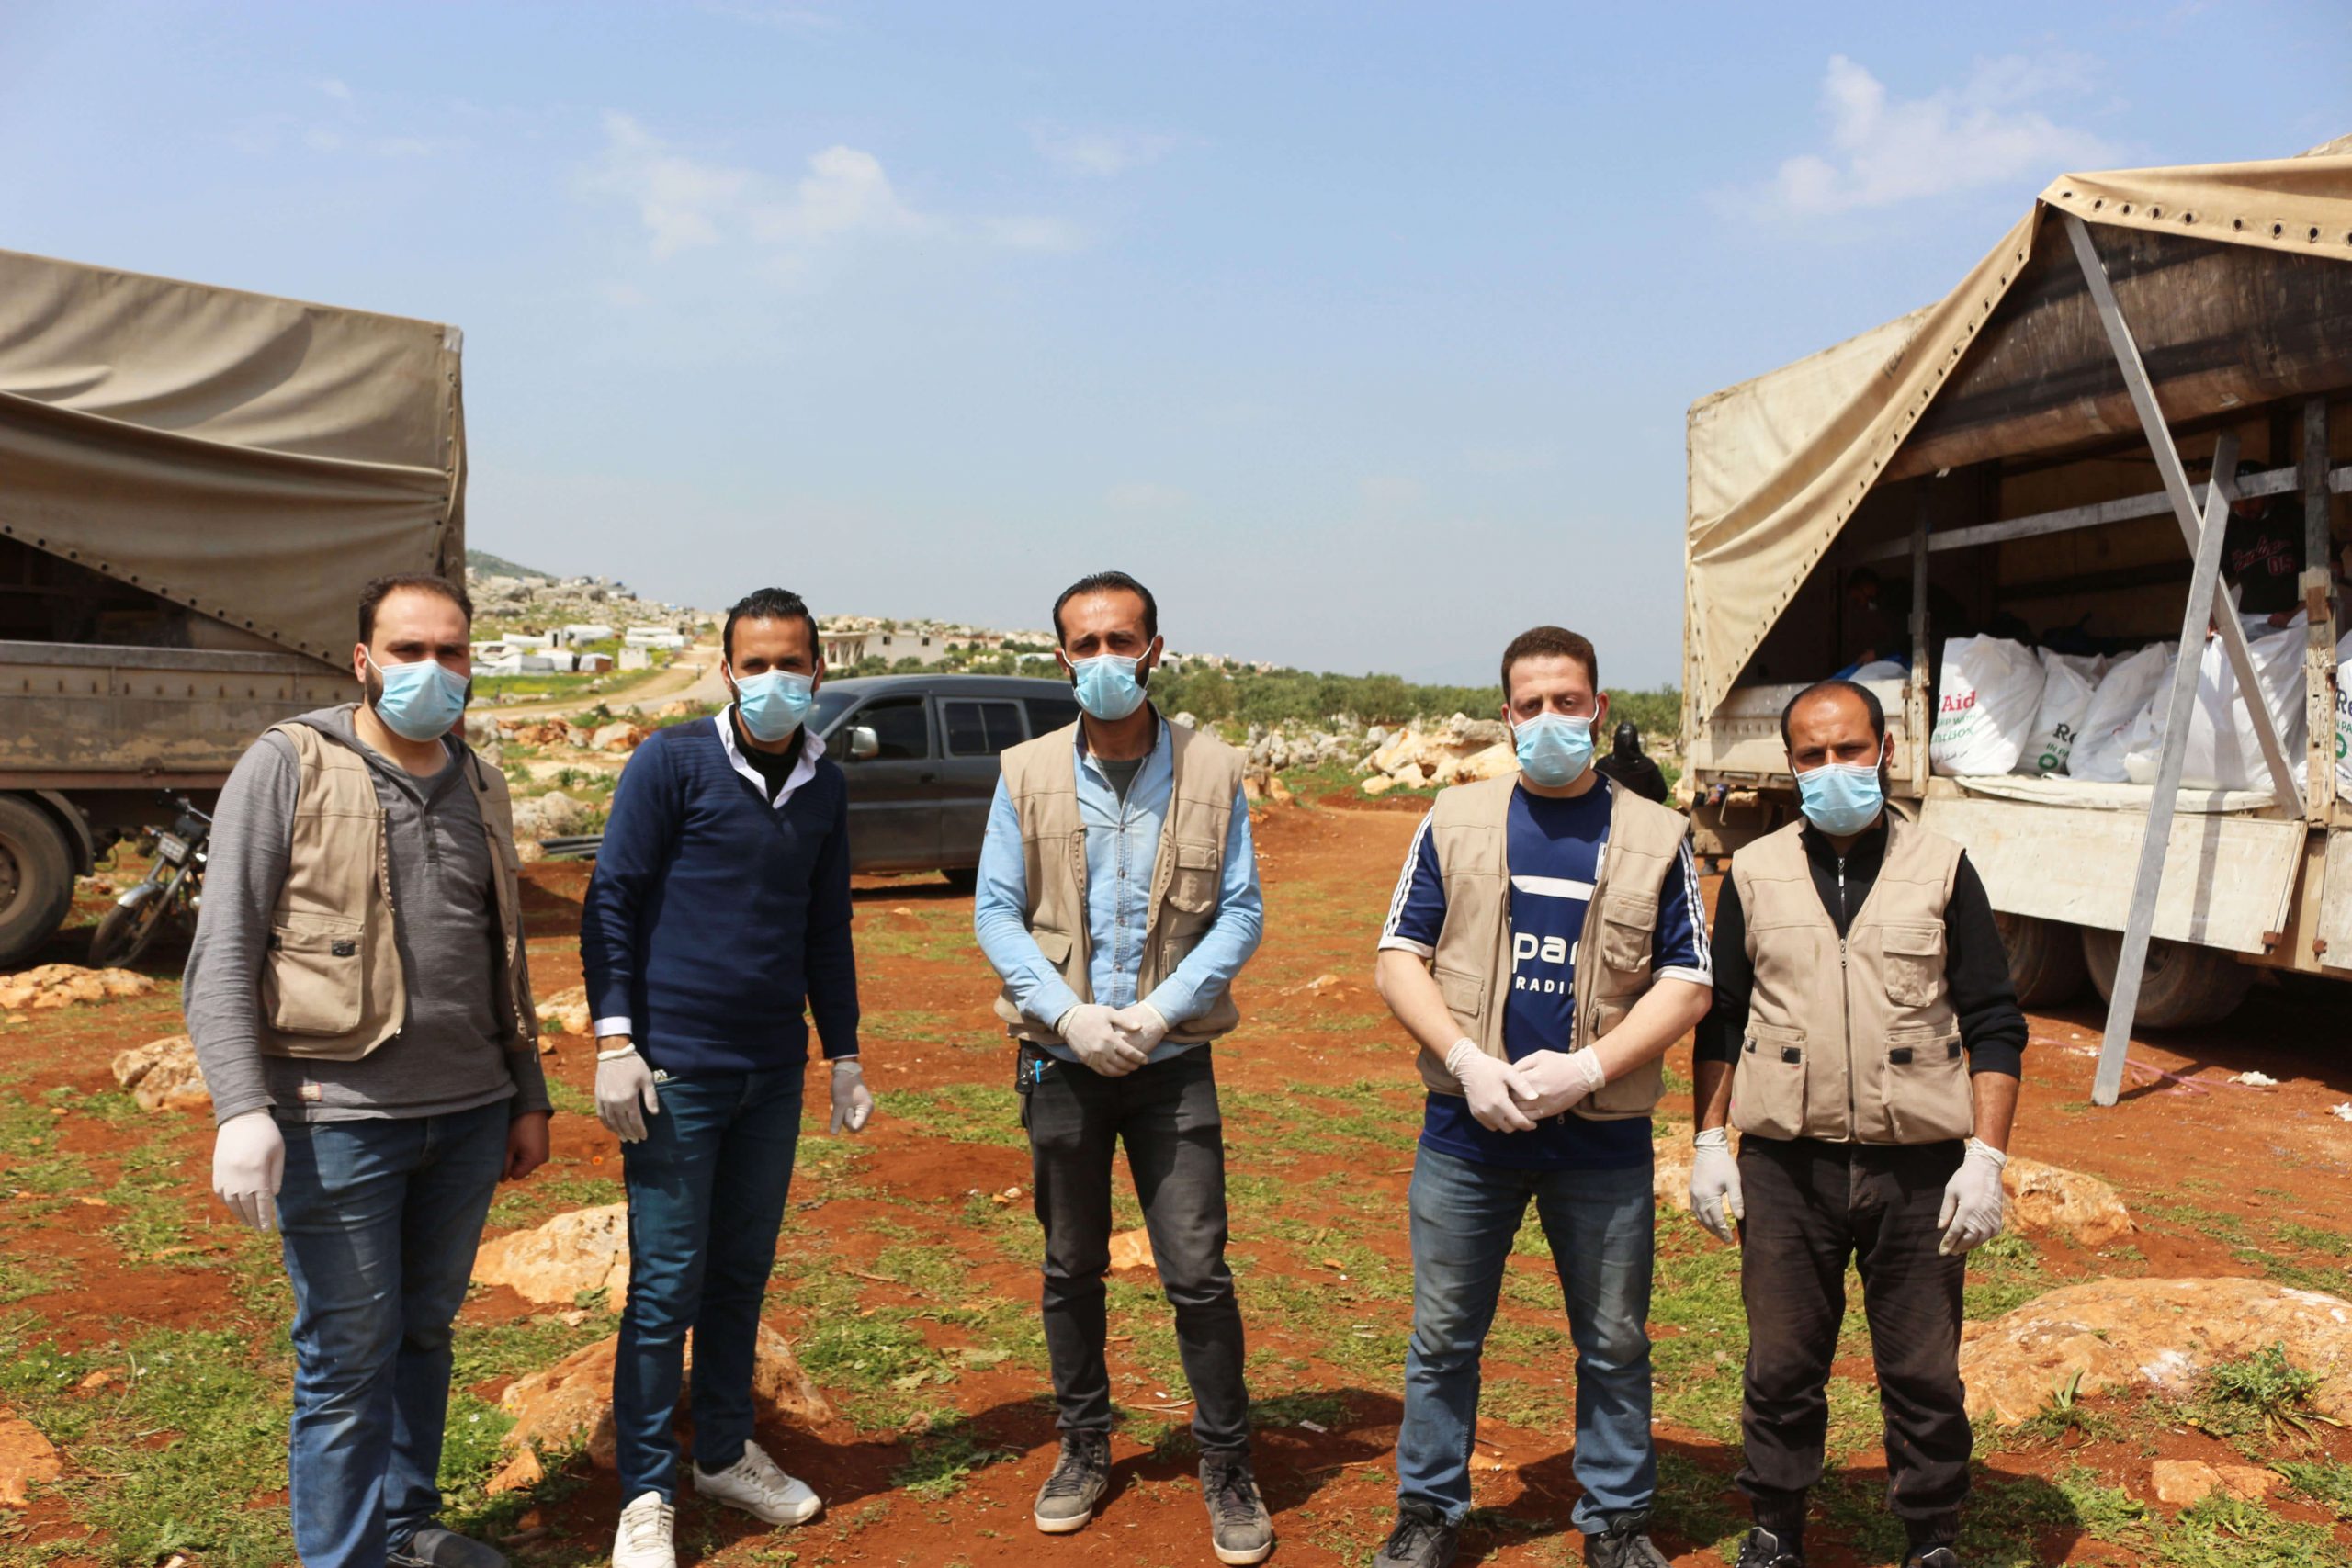 ReliefAid aid workers wearing facemasks in Syria